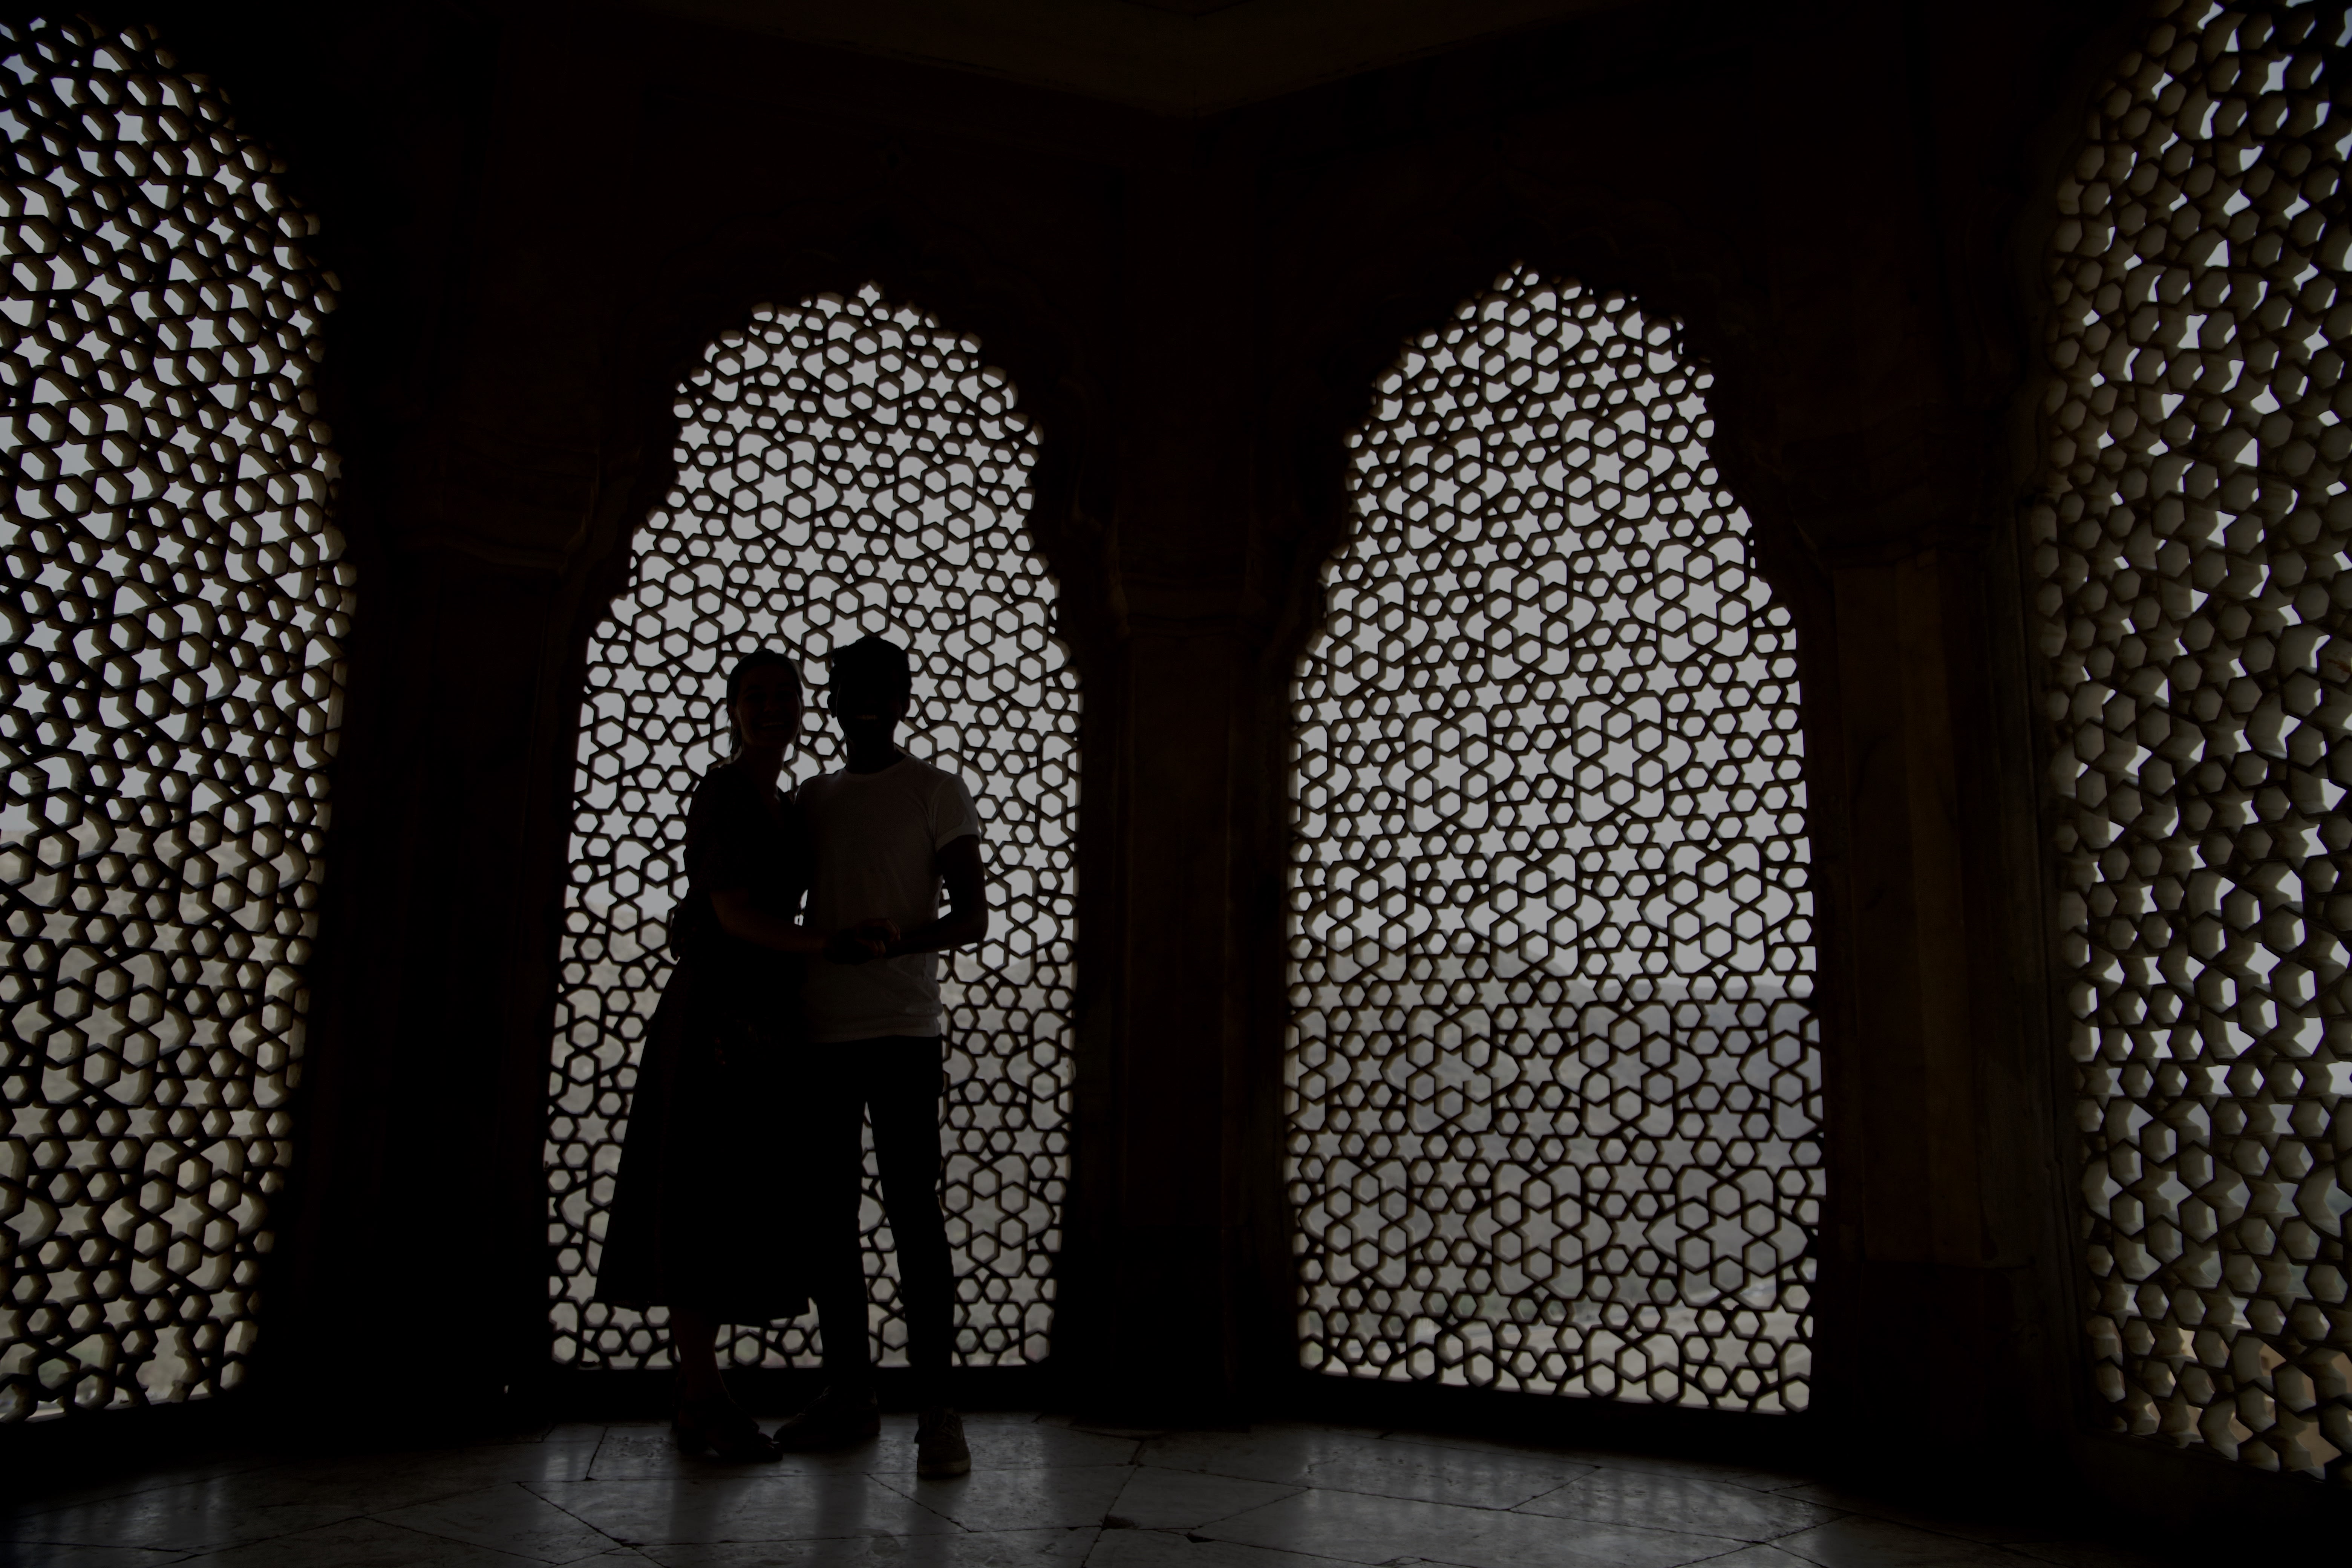 couple in Amber fort of Jaipur